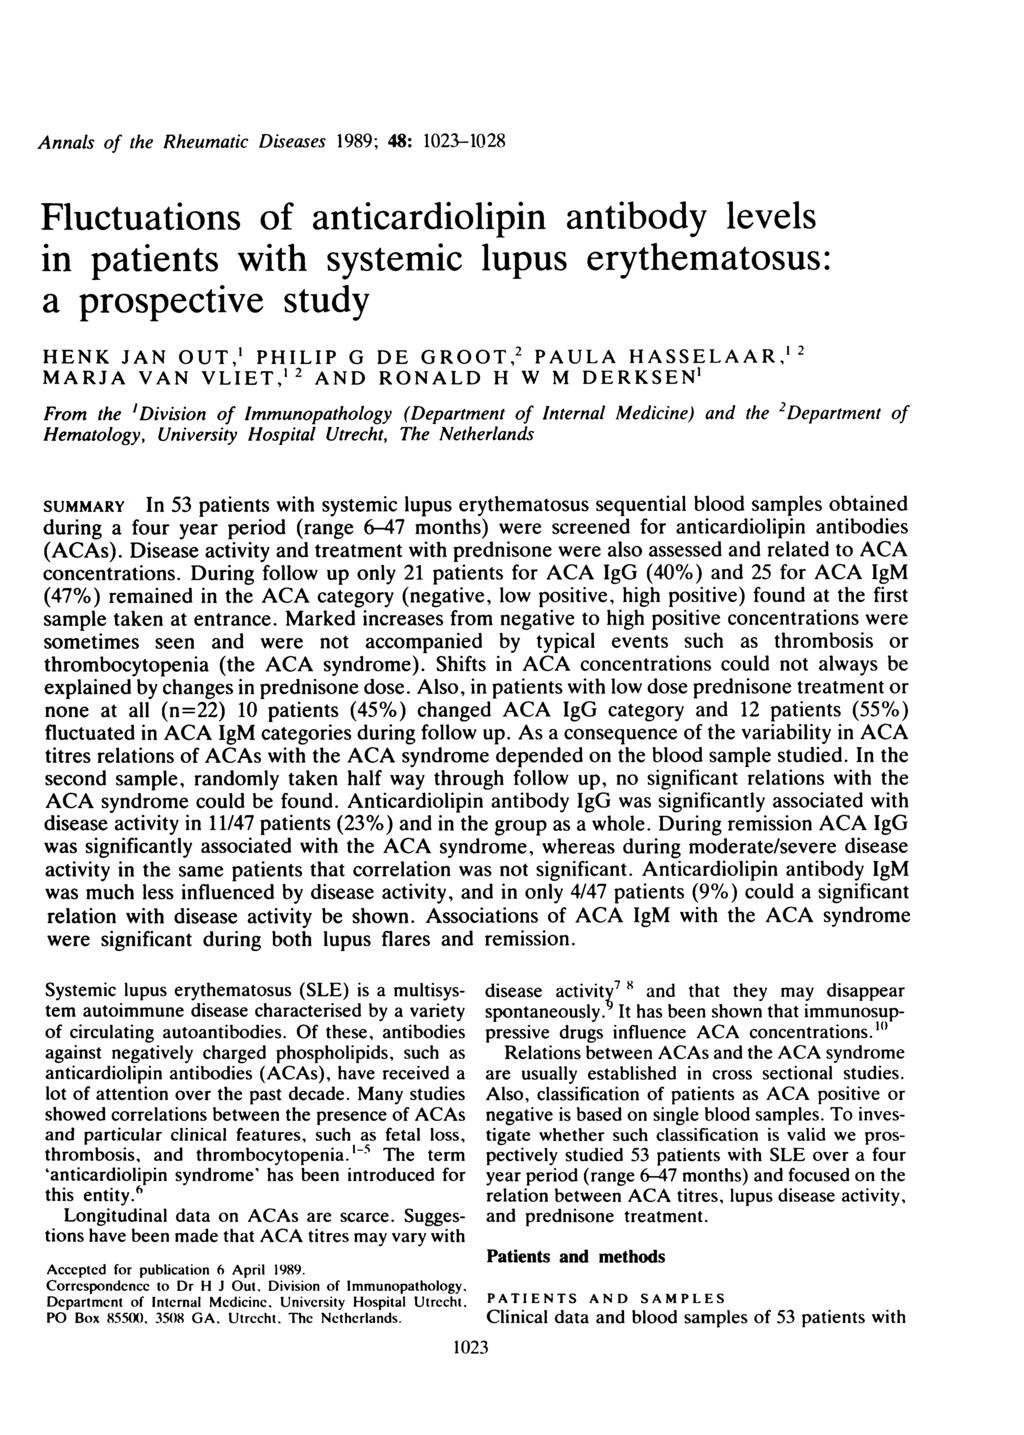 Annals of the Rheumatic Diseases 1989; 48: 1023-1028 Fluctuations of anticardiolipin antibody levels in patients with systemic lupus erythematosus: a prospective study HENK JAN OUT,' PHILIP G DE